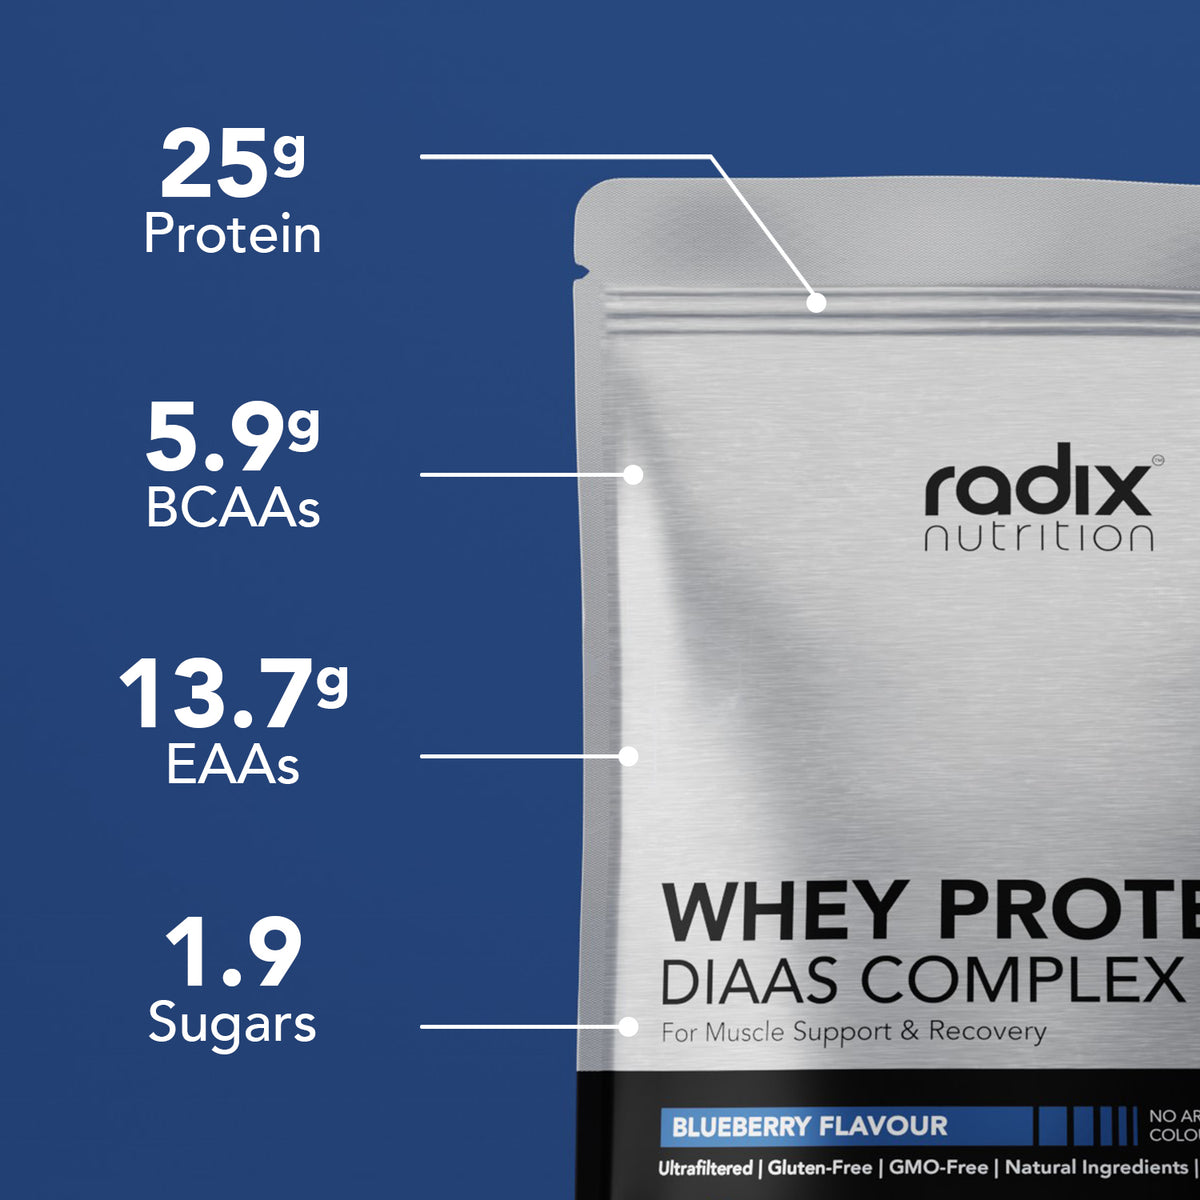 Whey Protein DIAAS Complex 1.61 - Blueberry / Single Serve